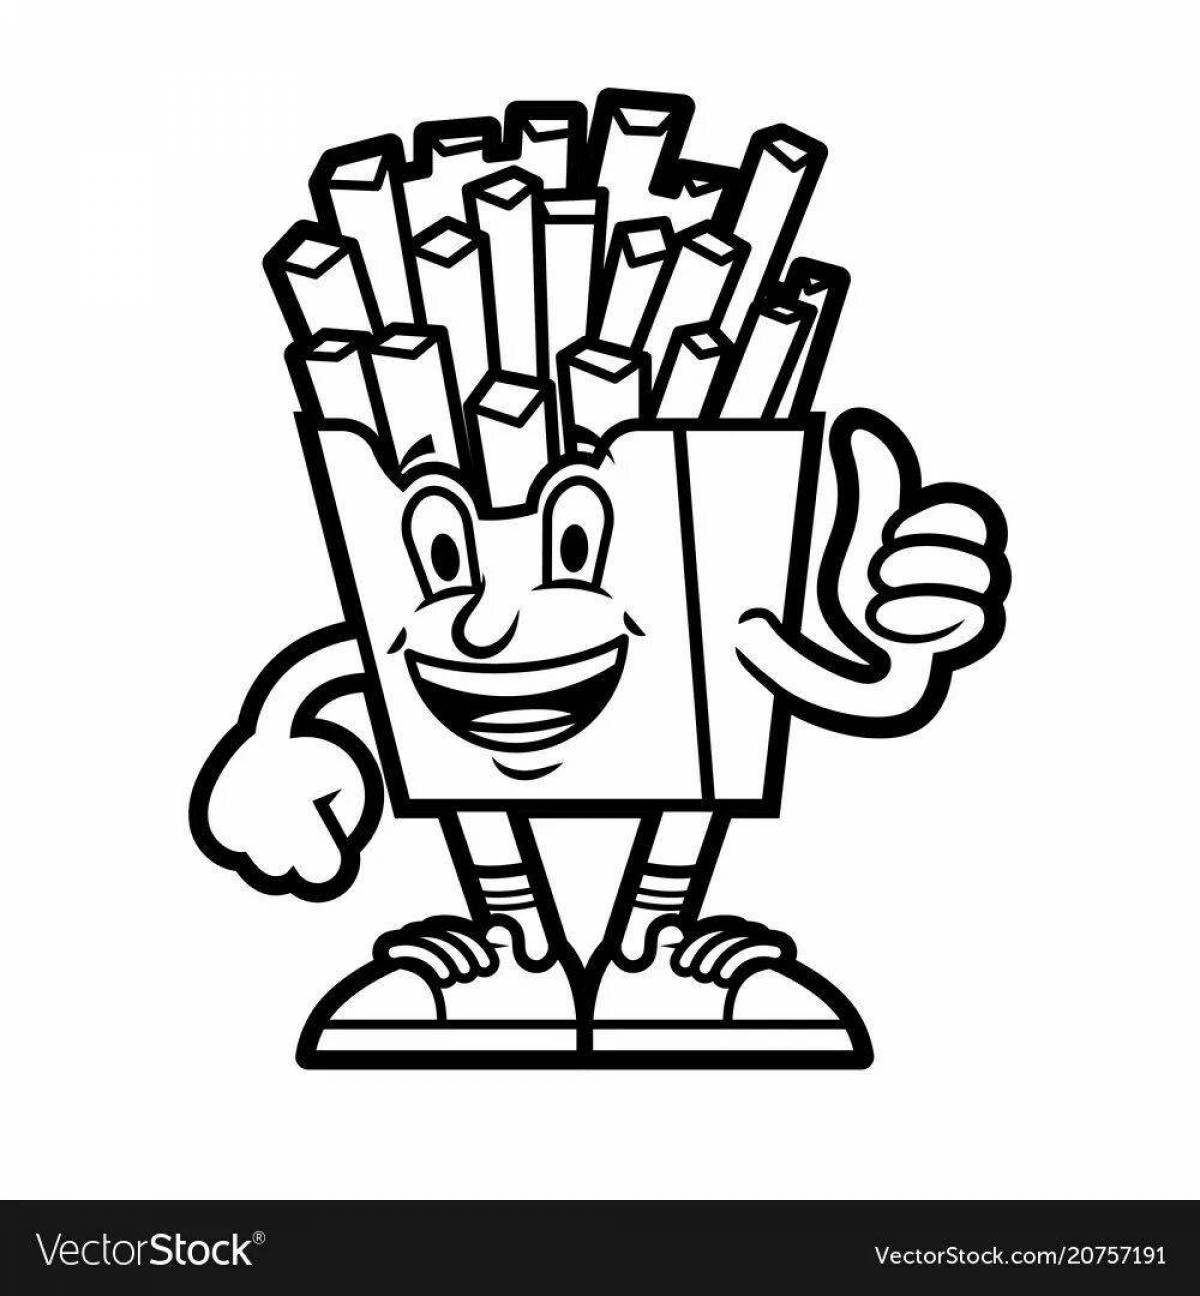 Lovely french fries coloring page for kids